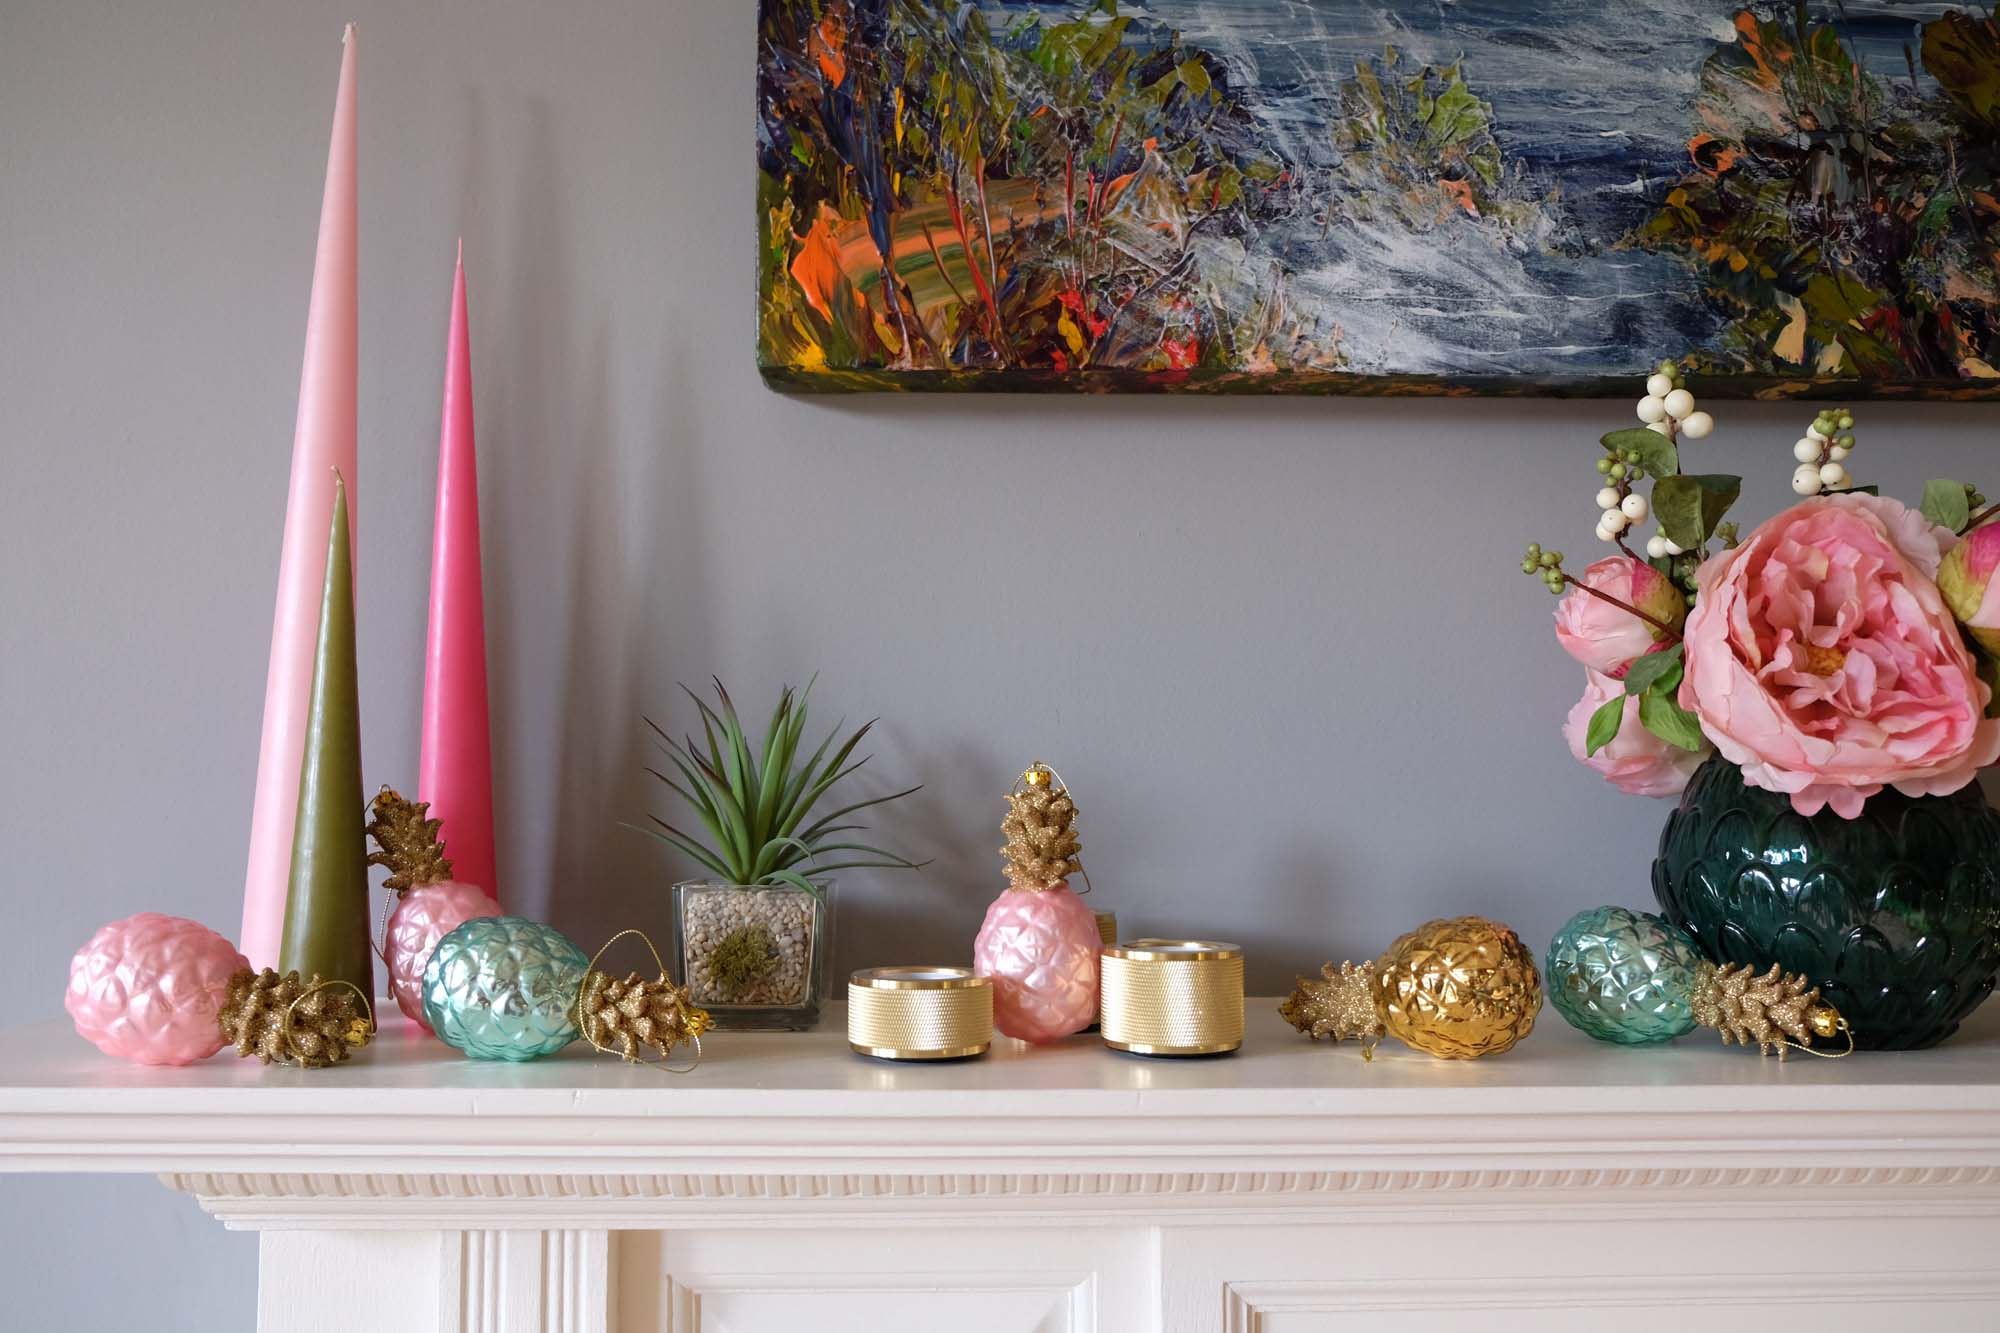 Pineapple decorations: Oliver Bonas/Candles: Bluebellgray/Brass candleholders: Buster + Punch